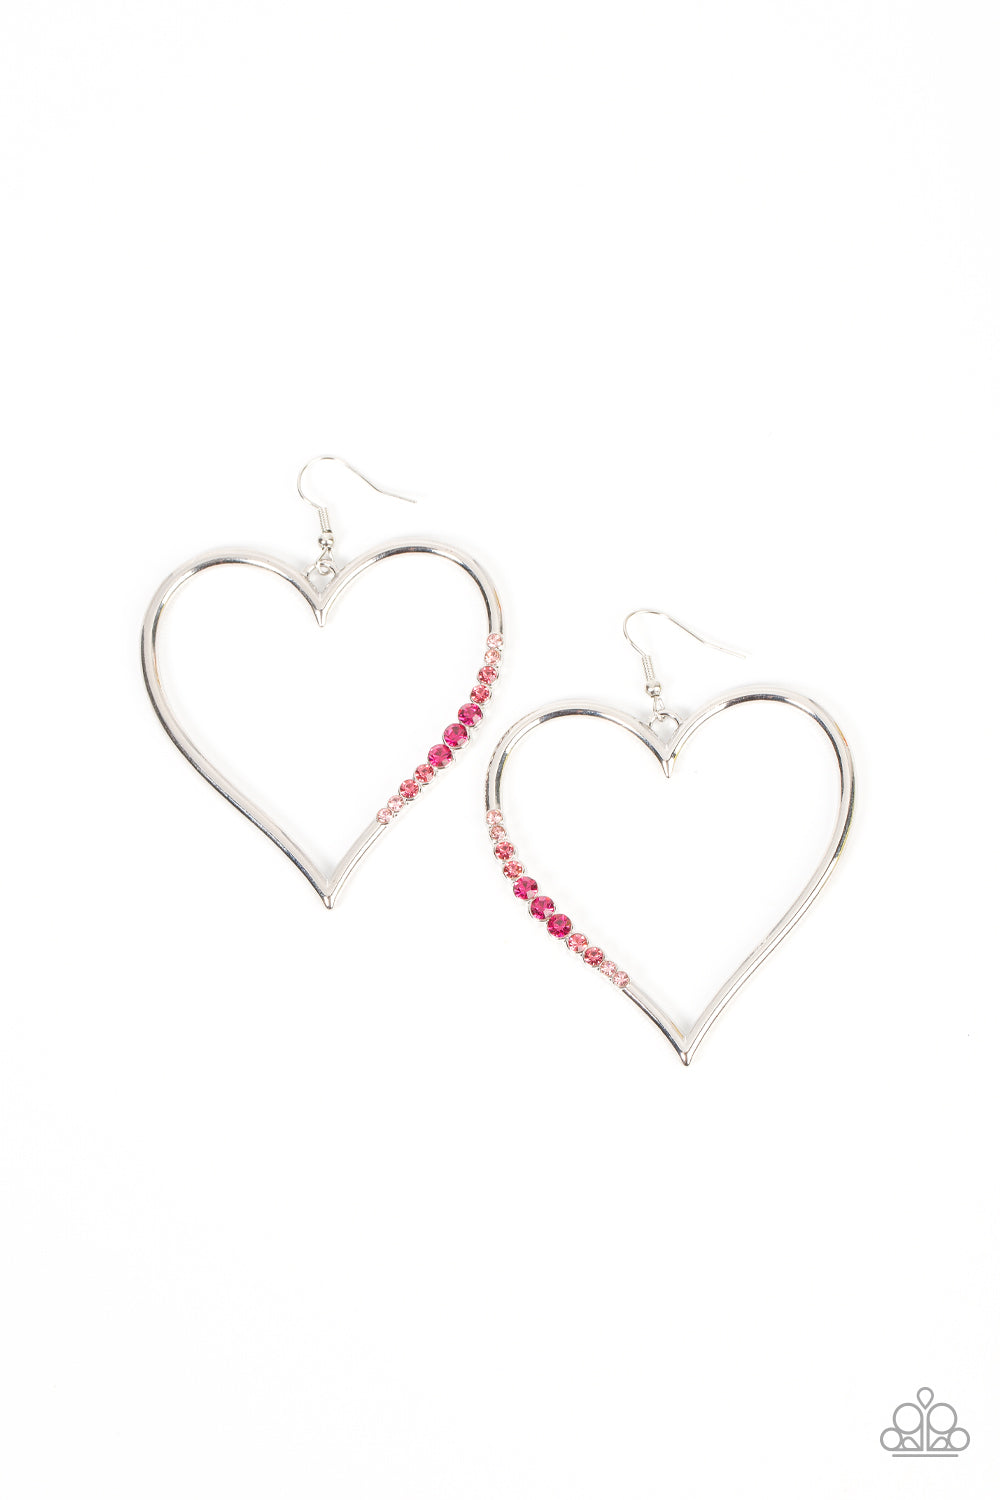 Bewitched Kiss - Pink Rhinestone Heart Earrings